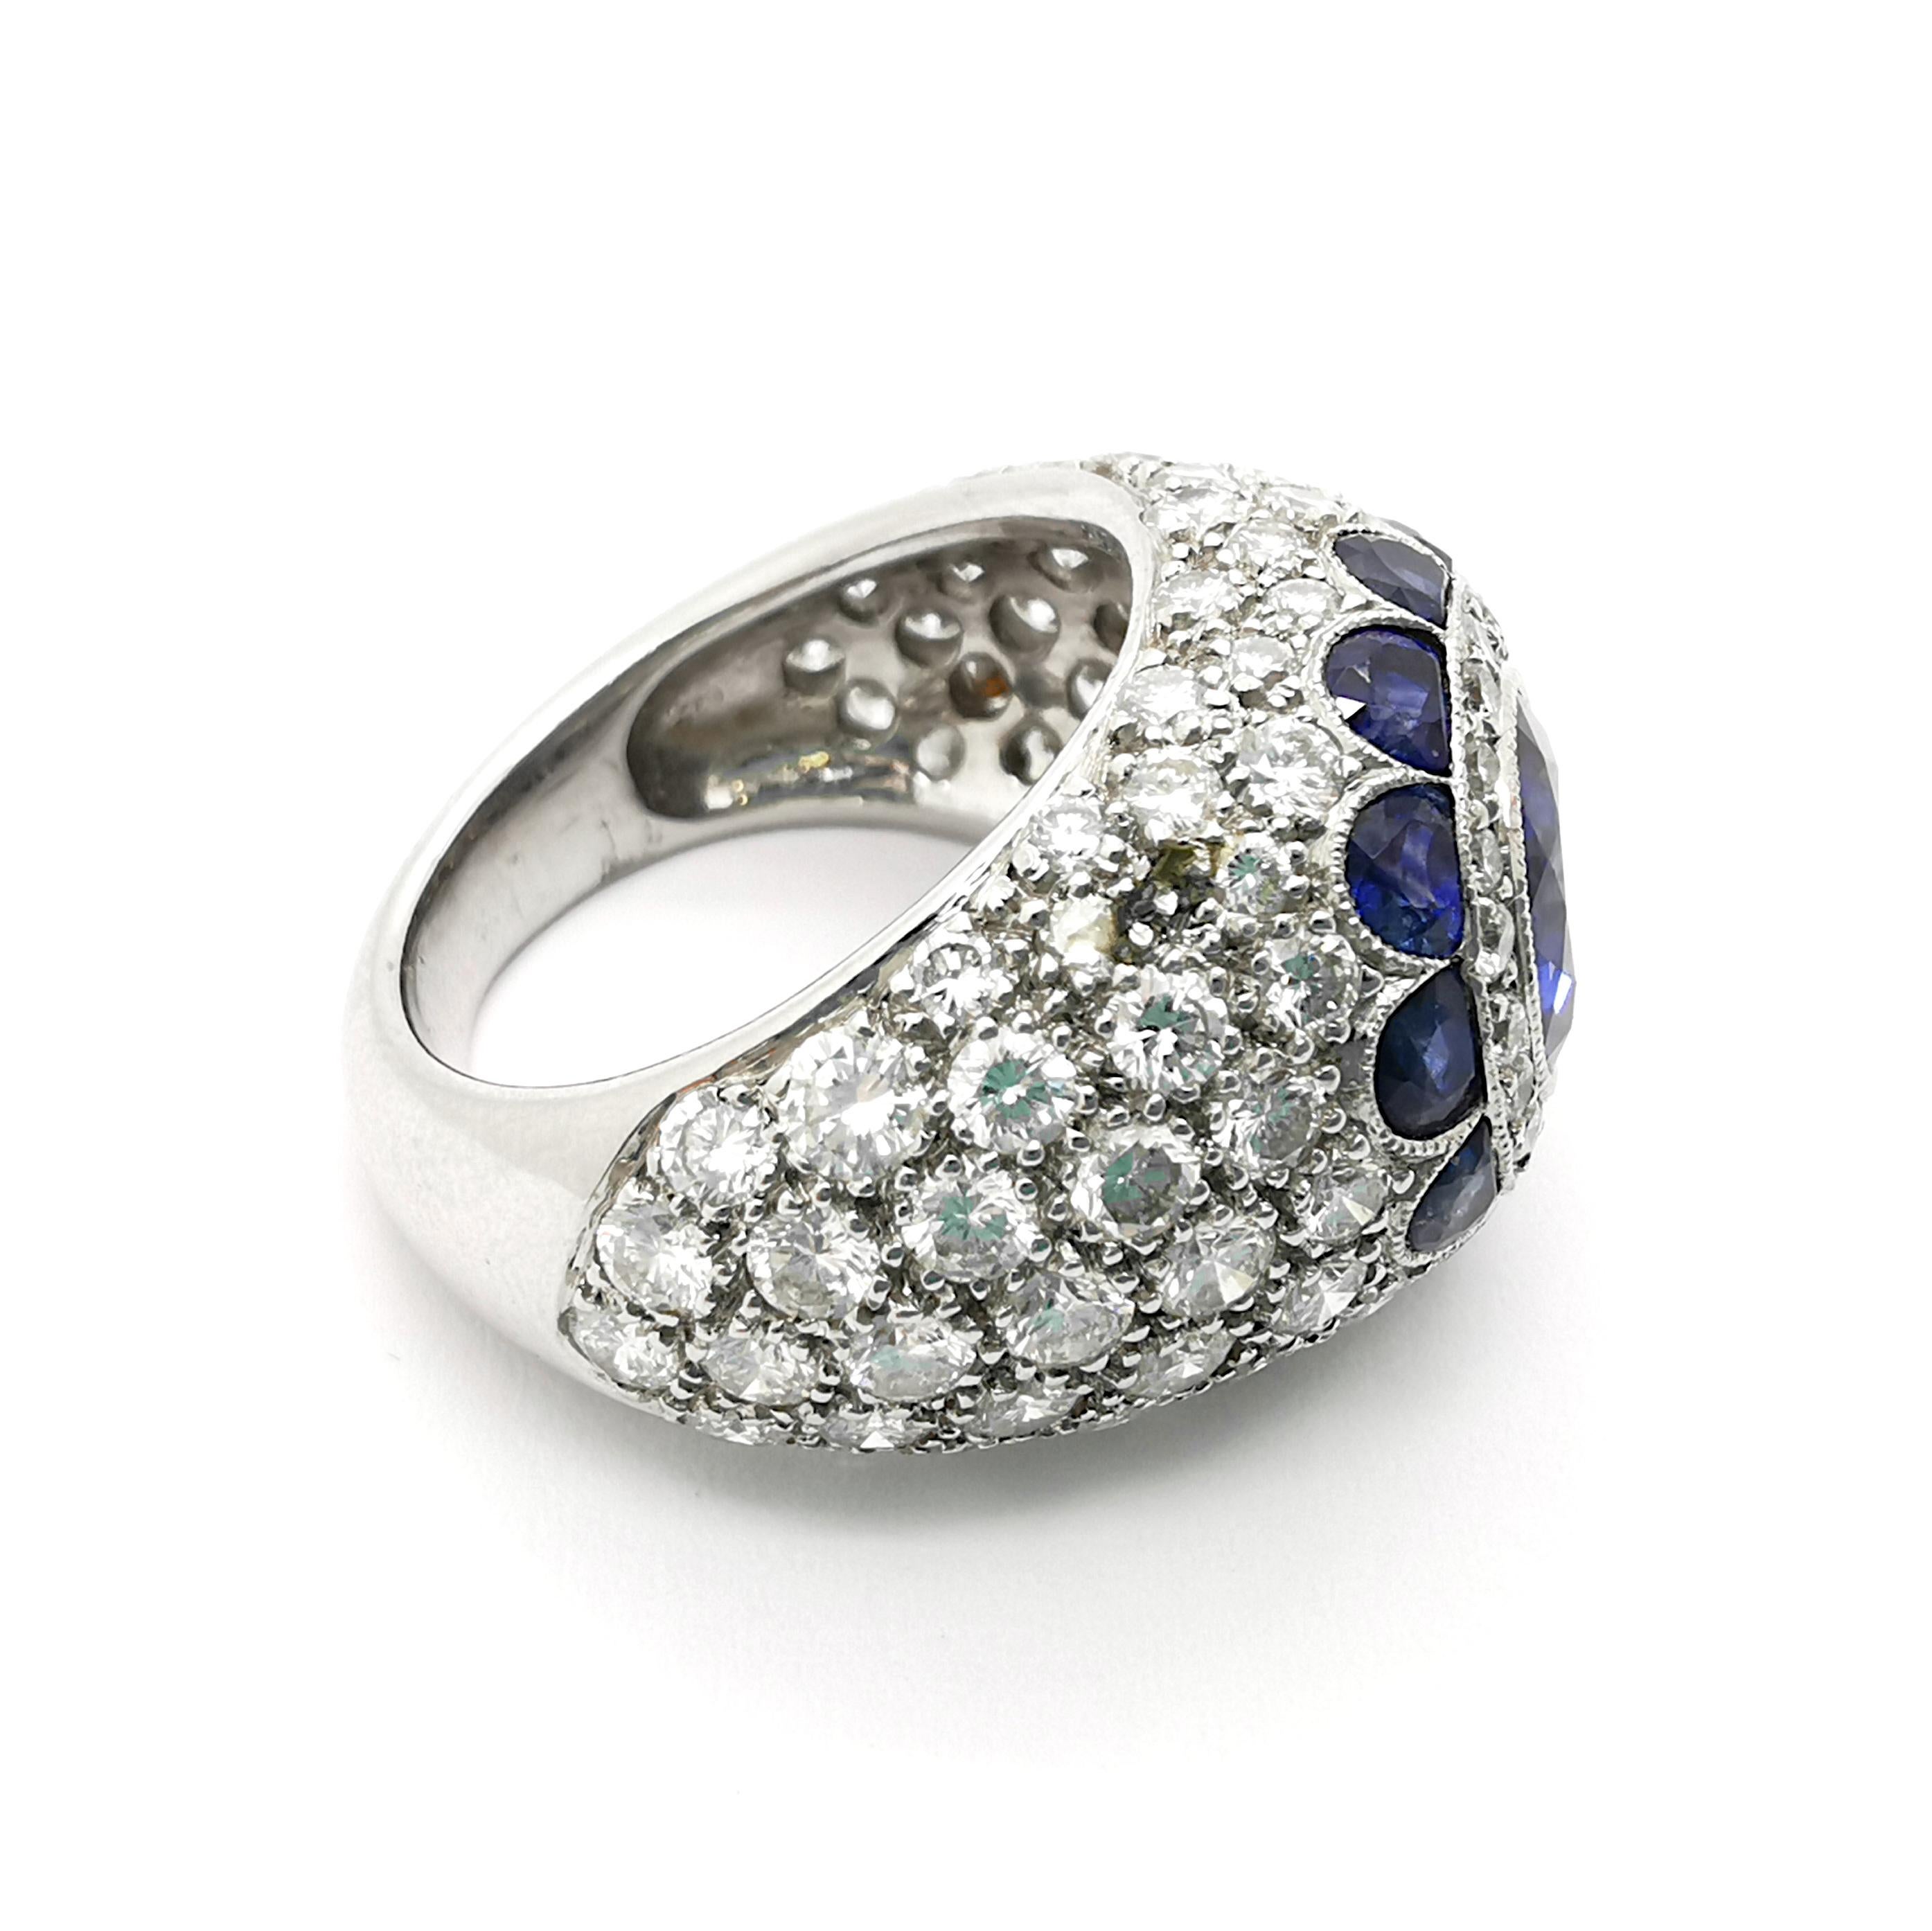 A sapphire and diamond bombé ring, with a round faceted sapphire, weighing approximately 2.20ct, within a surround of round brilliant cut diamonds and a border of half-moon shaped sapphires, in a flower motif, with pavé set round brilliant-cut